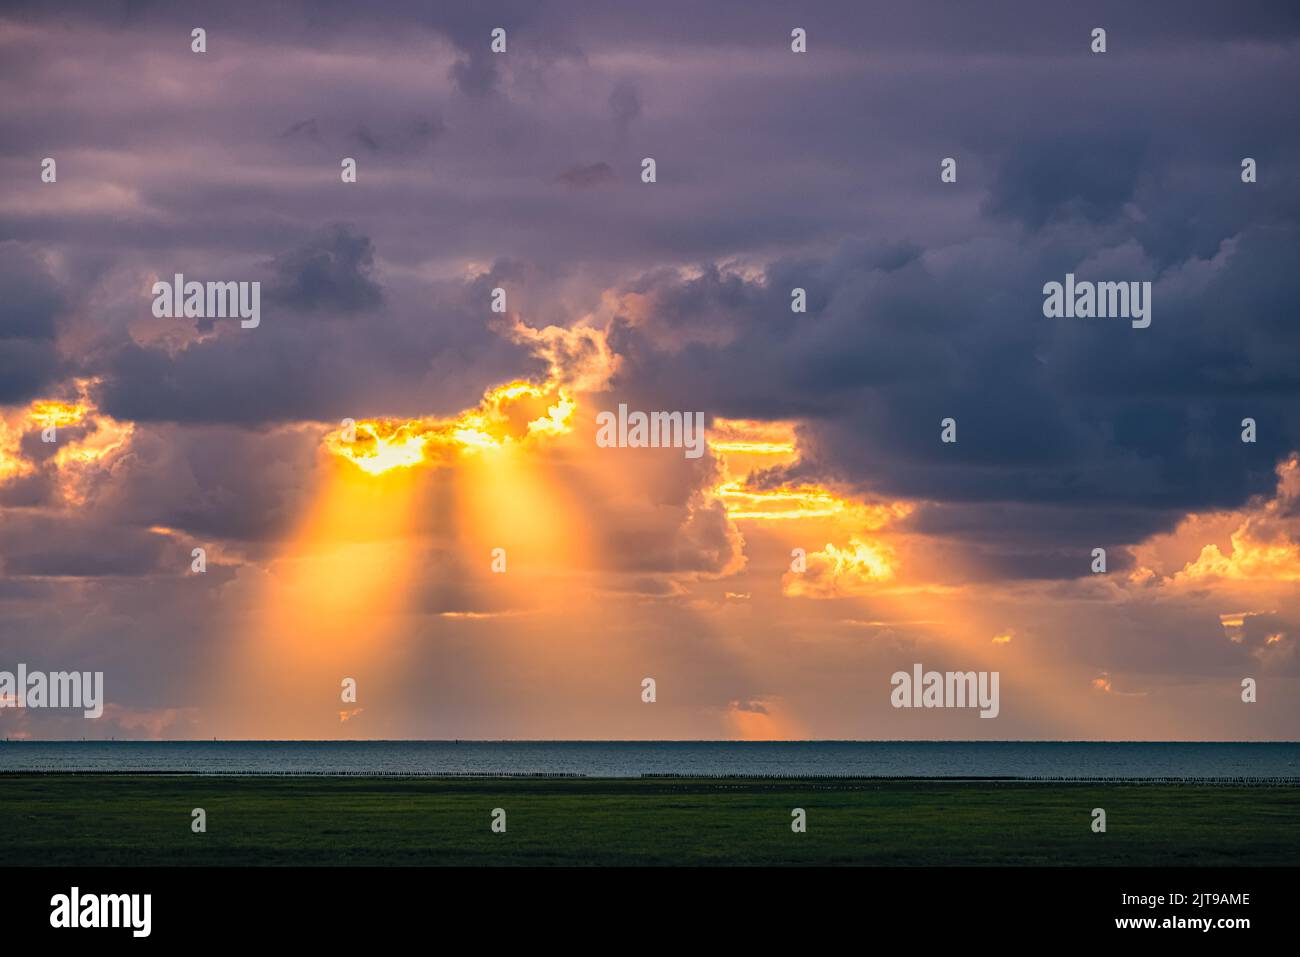 Crepuscular rays (more commonly known as sunbeams, sun rays, splintered light, or god rays), in atmospheric optics, are rays of sunlight that appear t Stock Photo